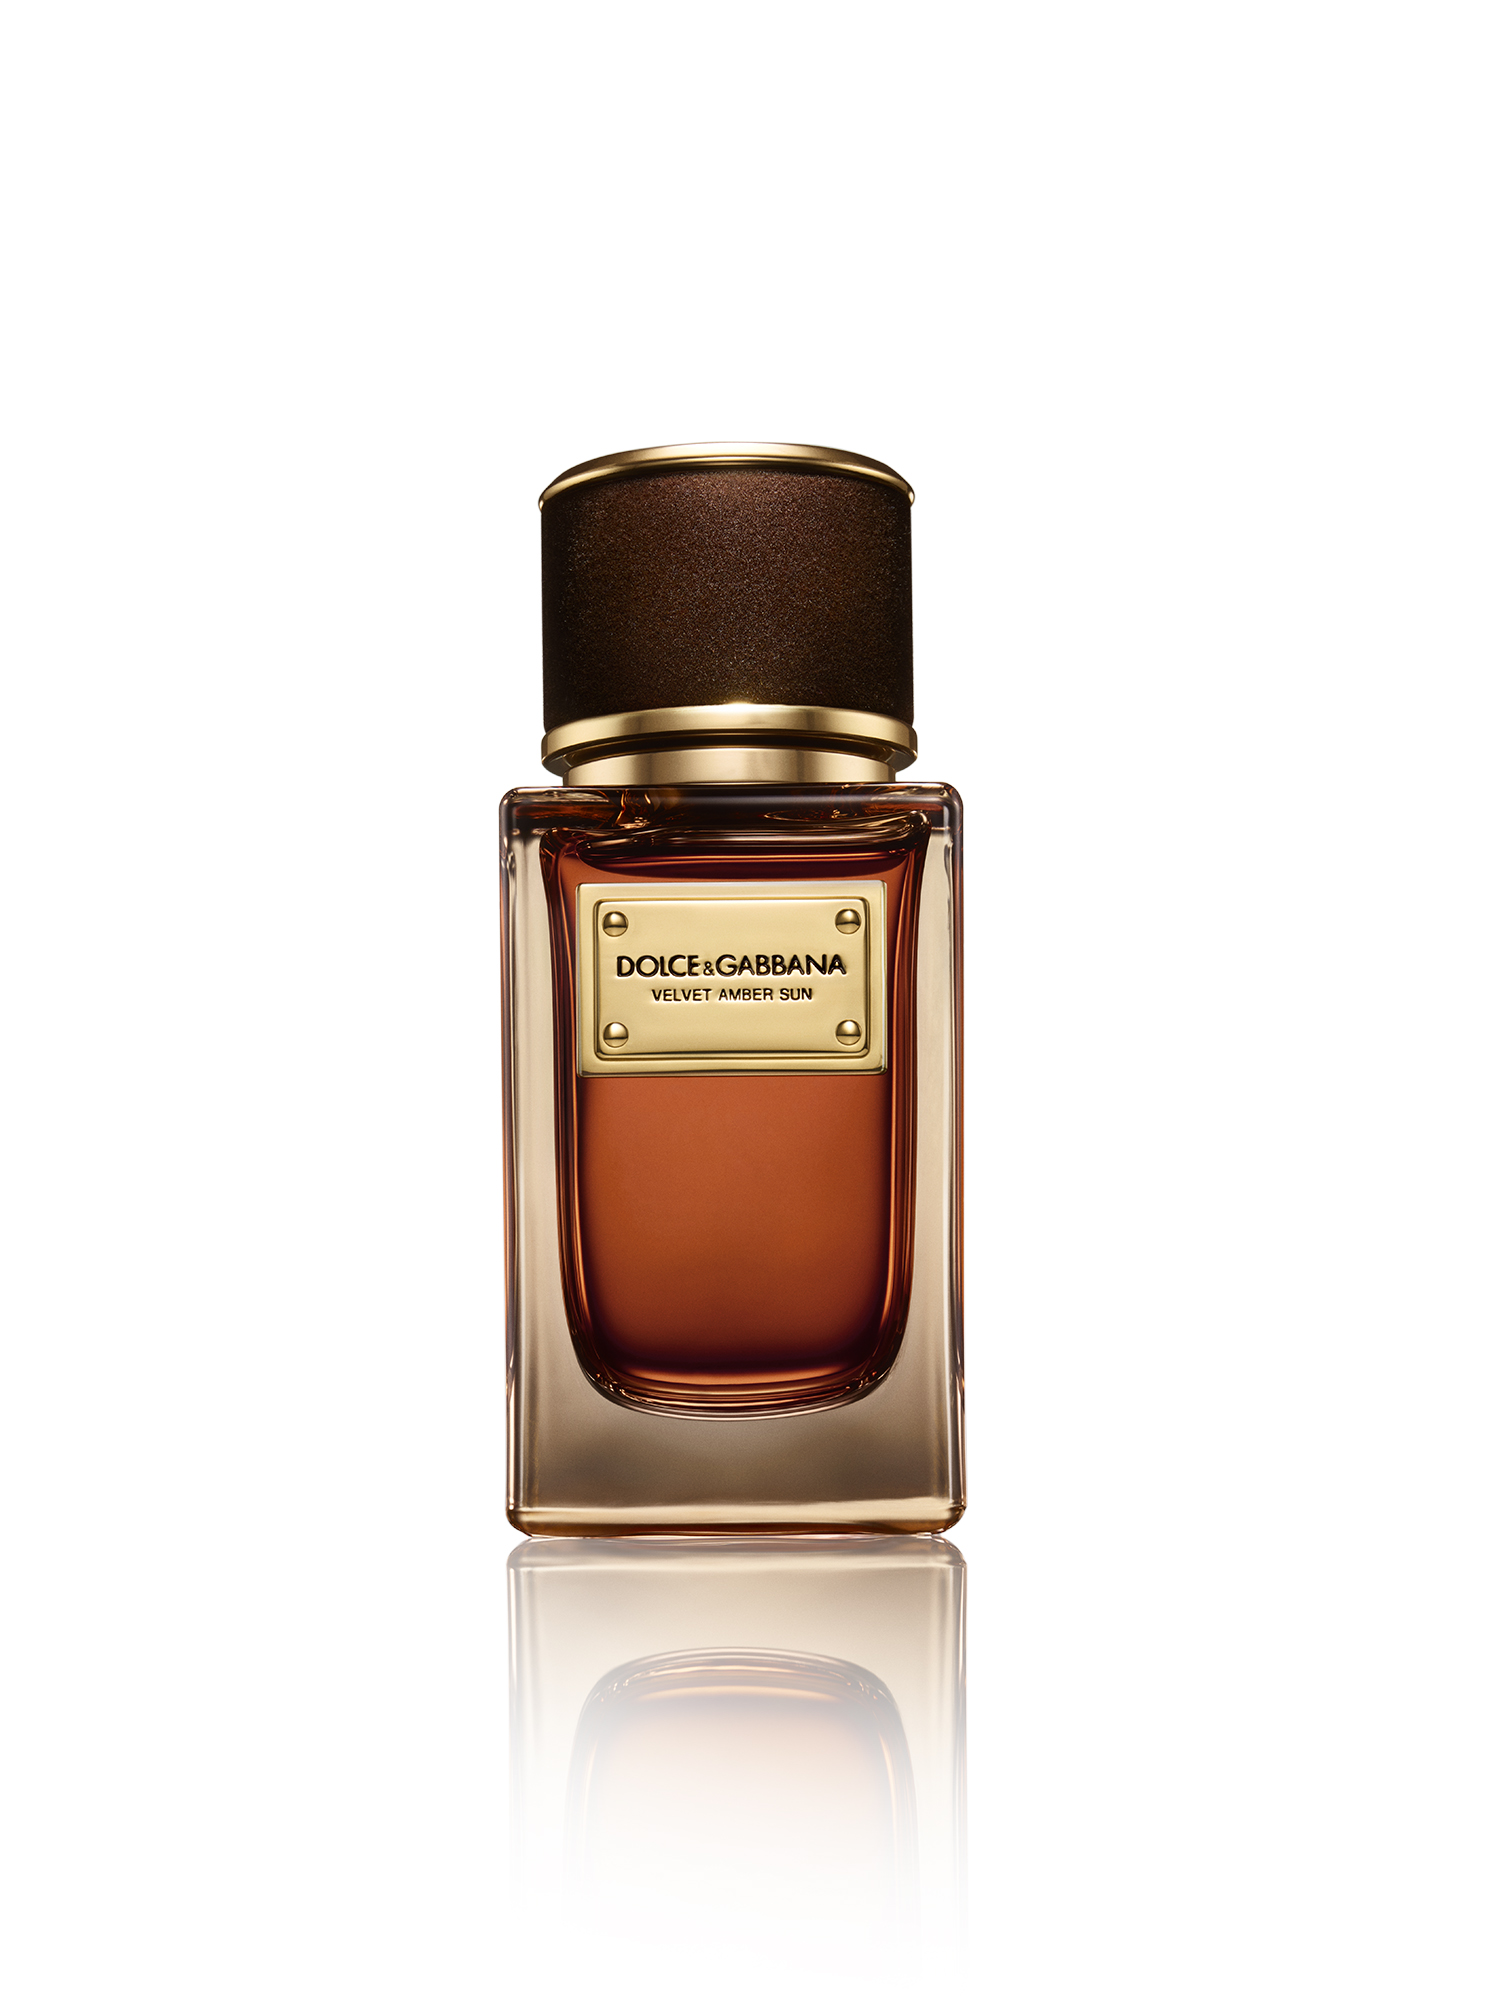 Scent of the Week: Introducing Dolce&Gabbana's Latest Velvet Amber Duo ...